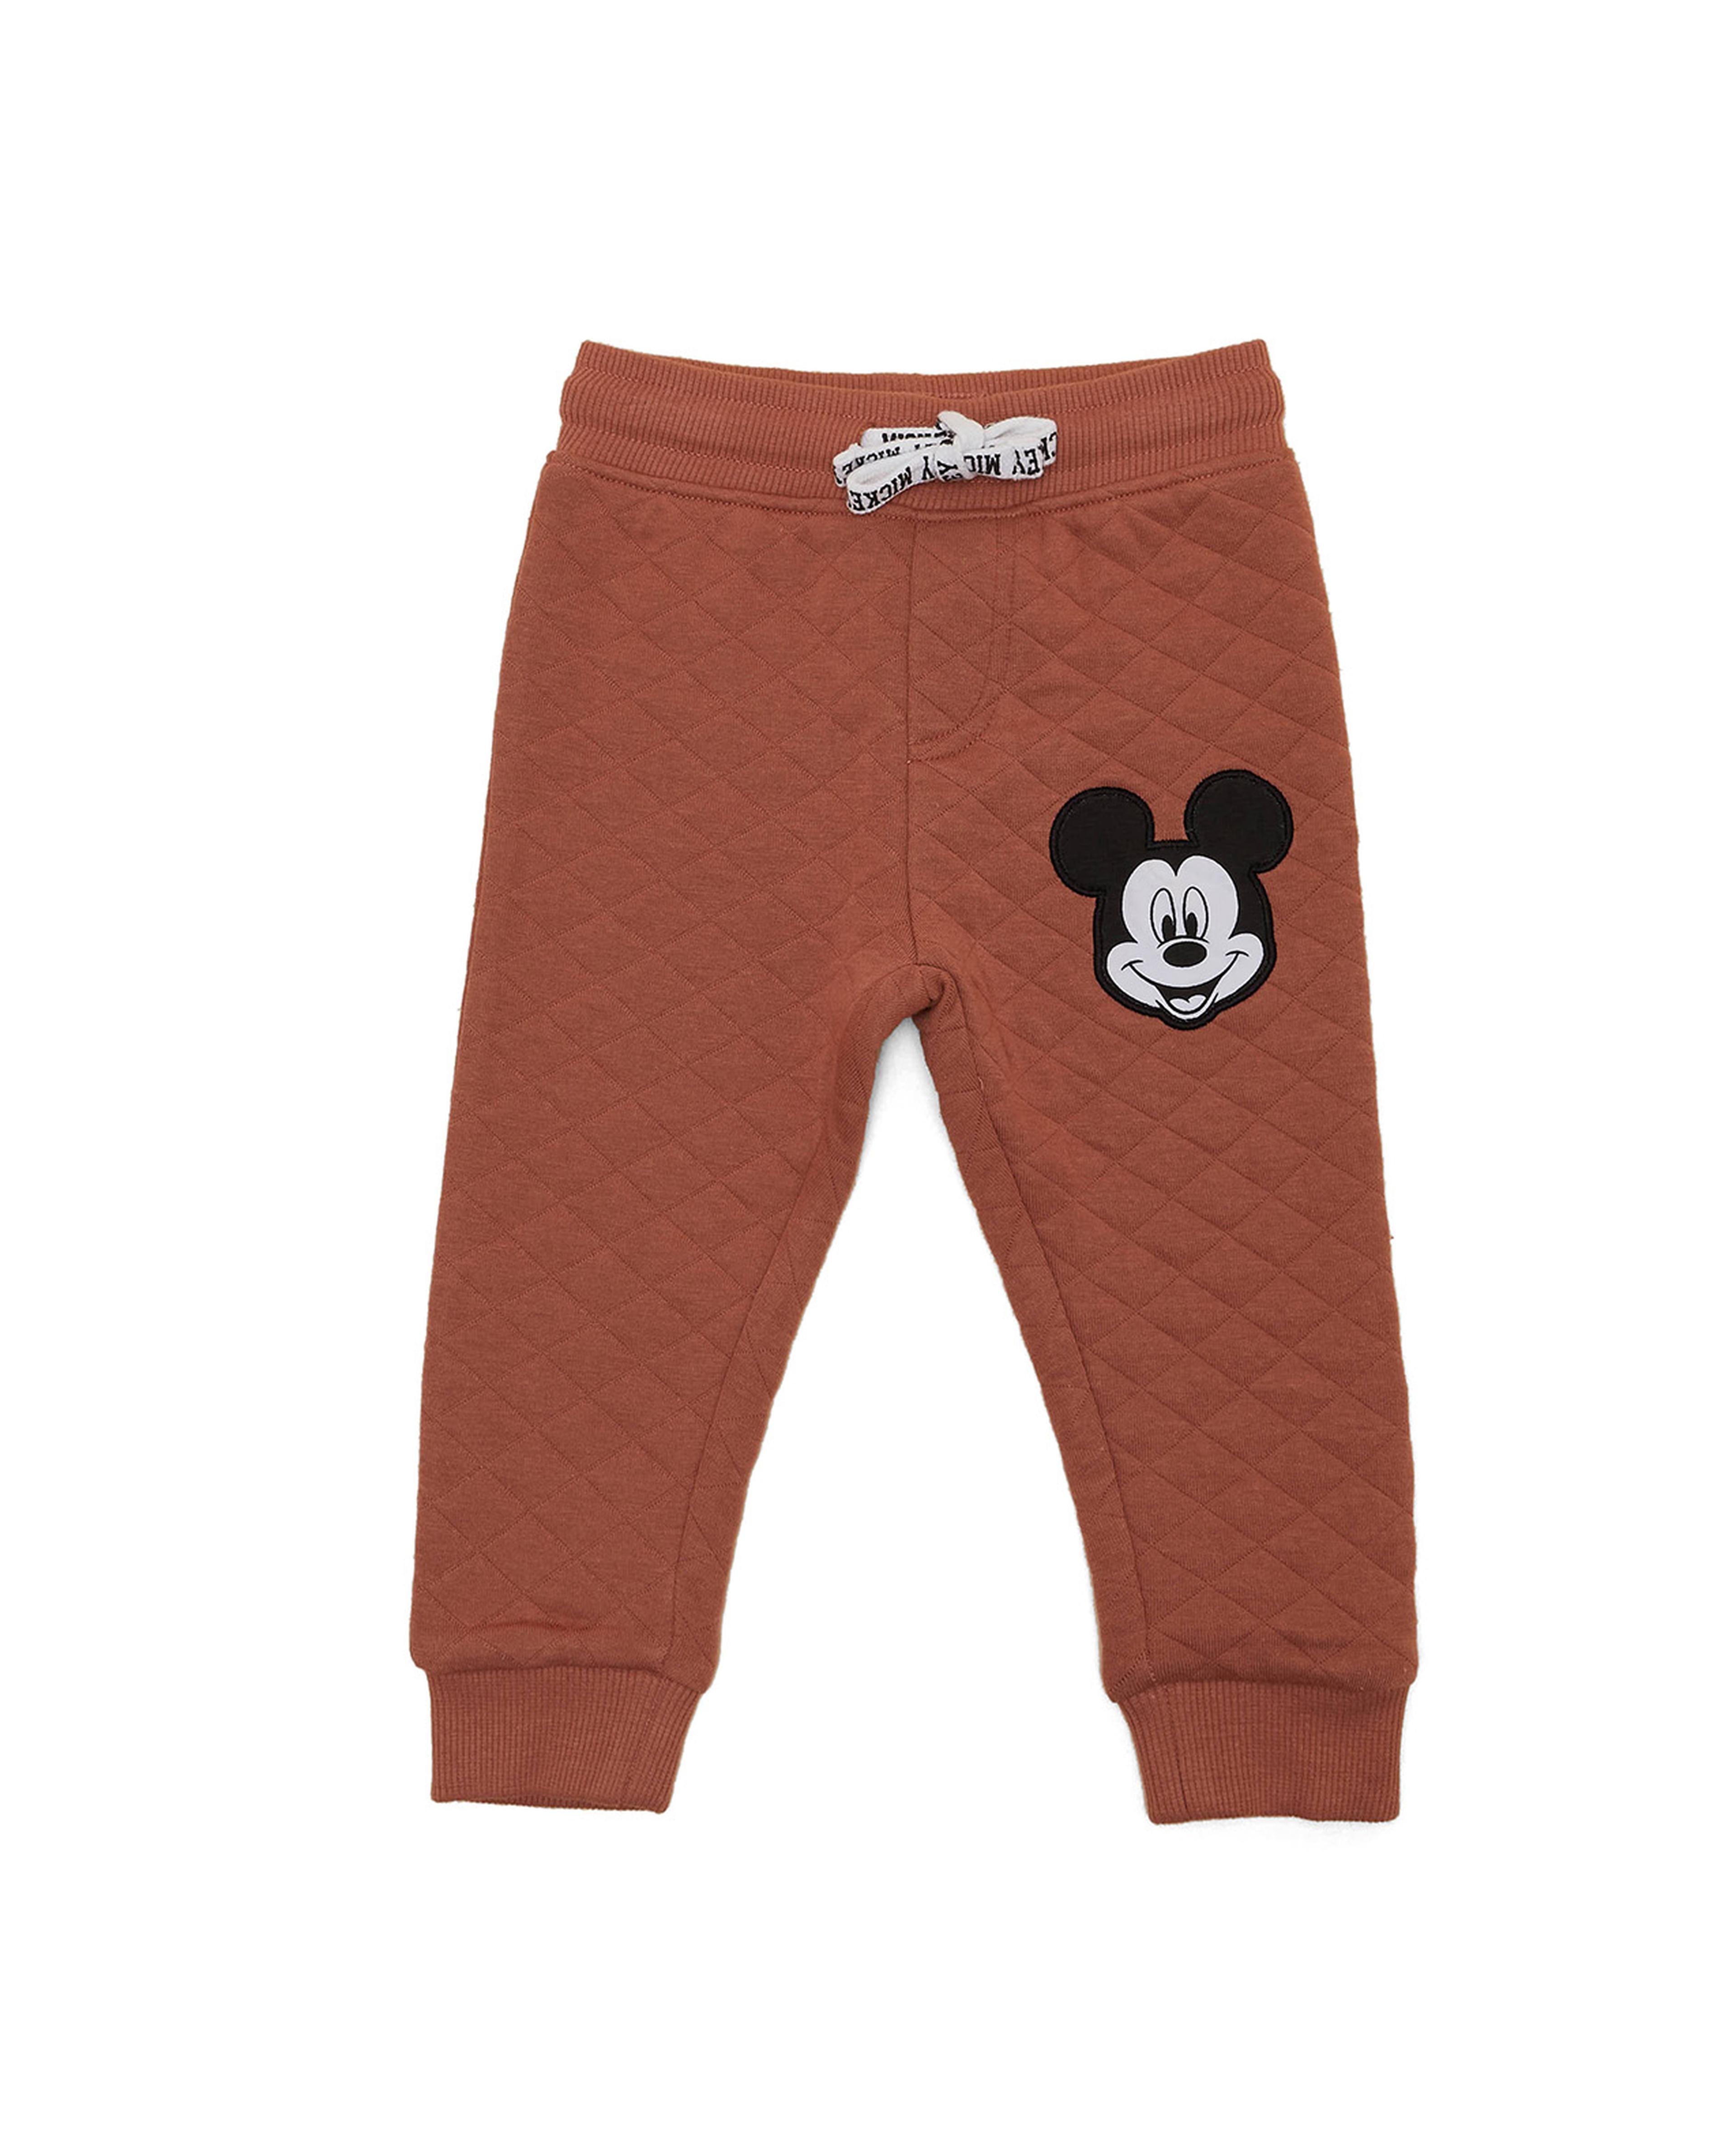 Mickey Mouse Embroidered Sweatsuit Set